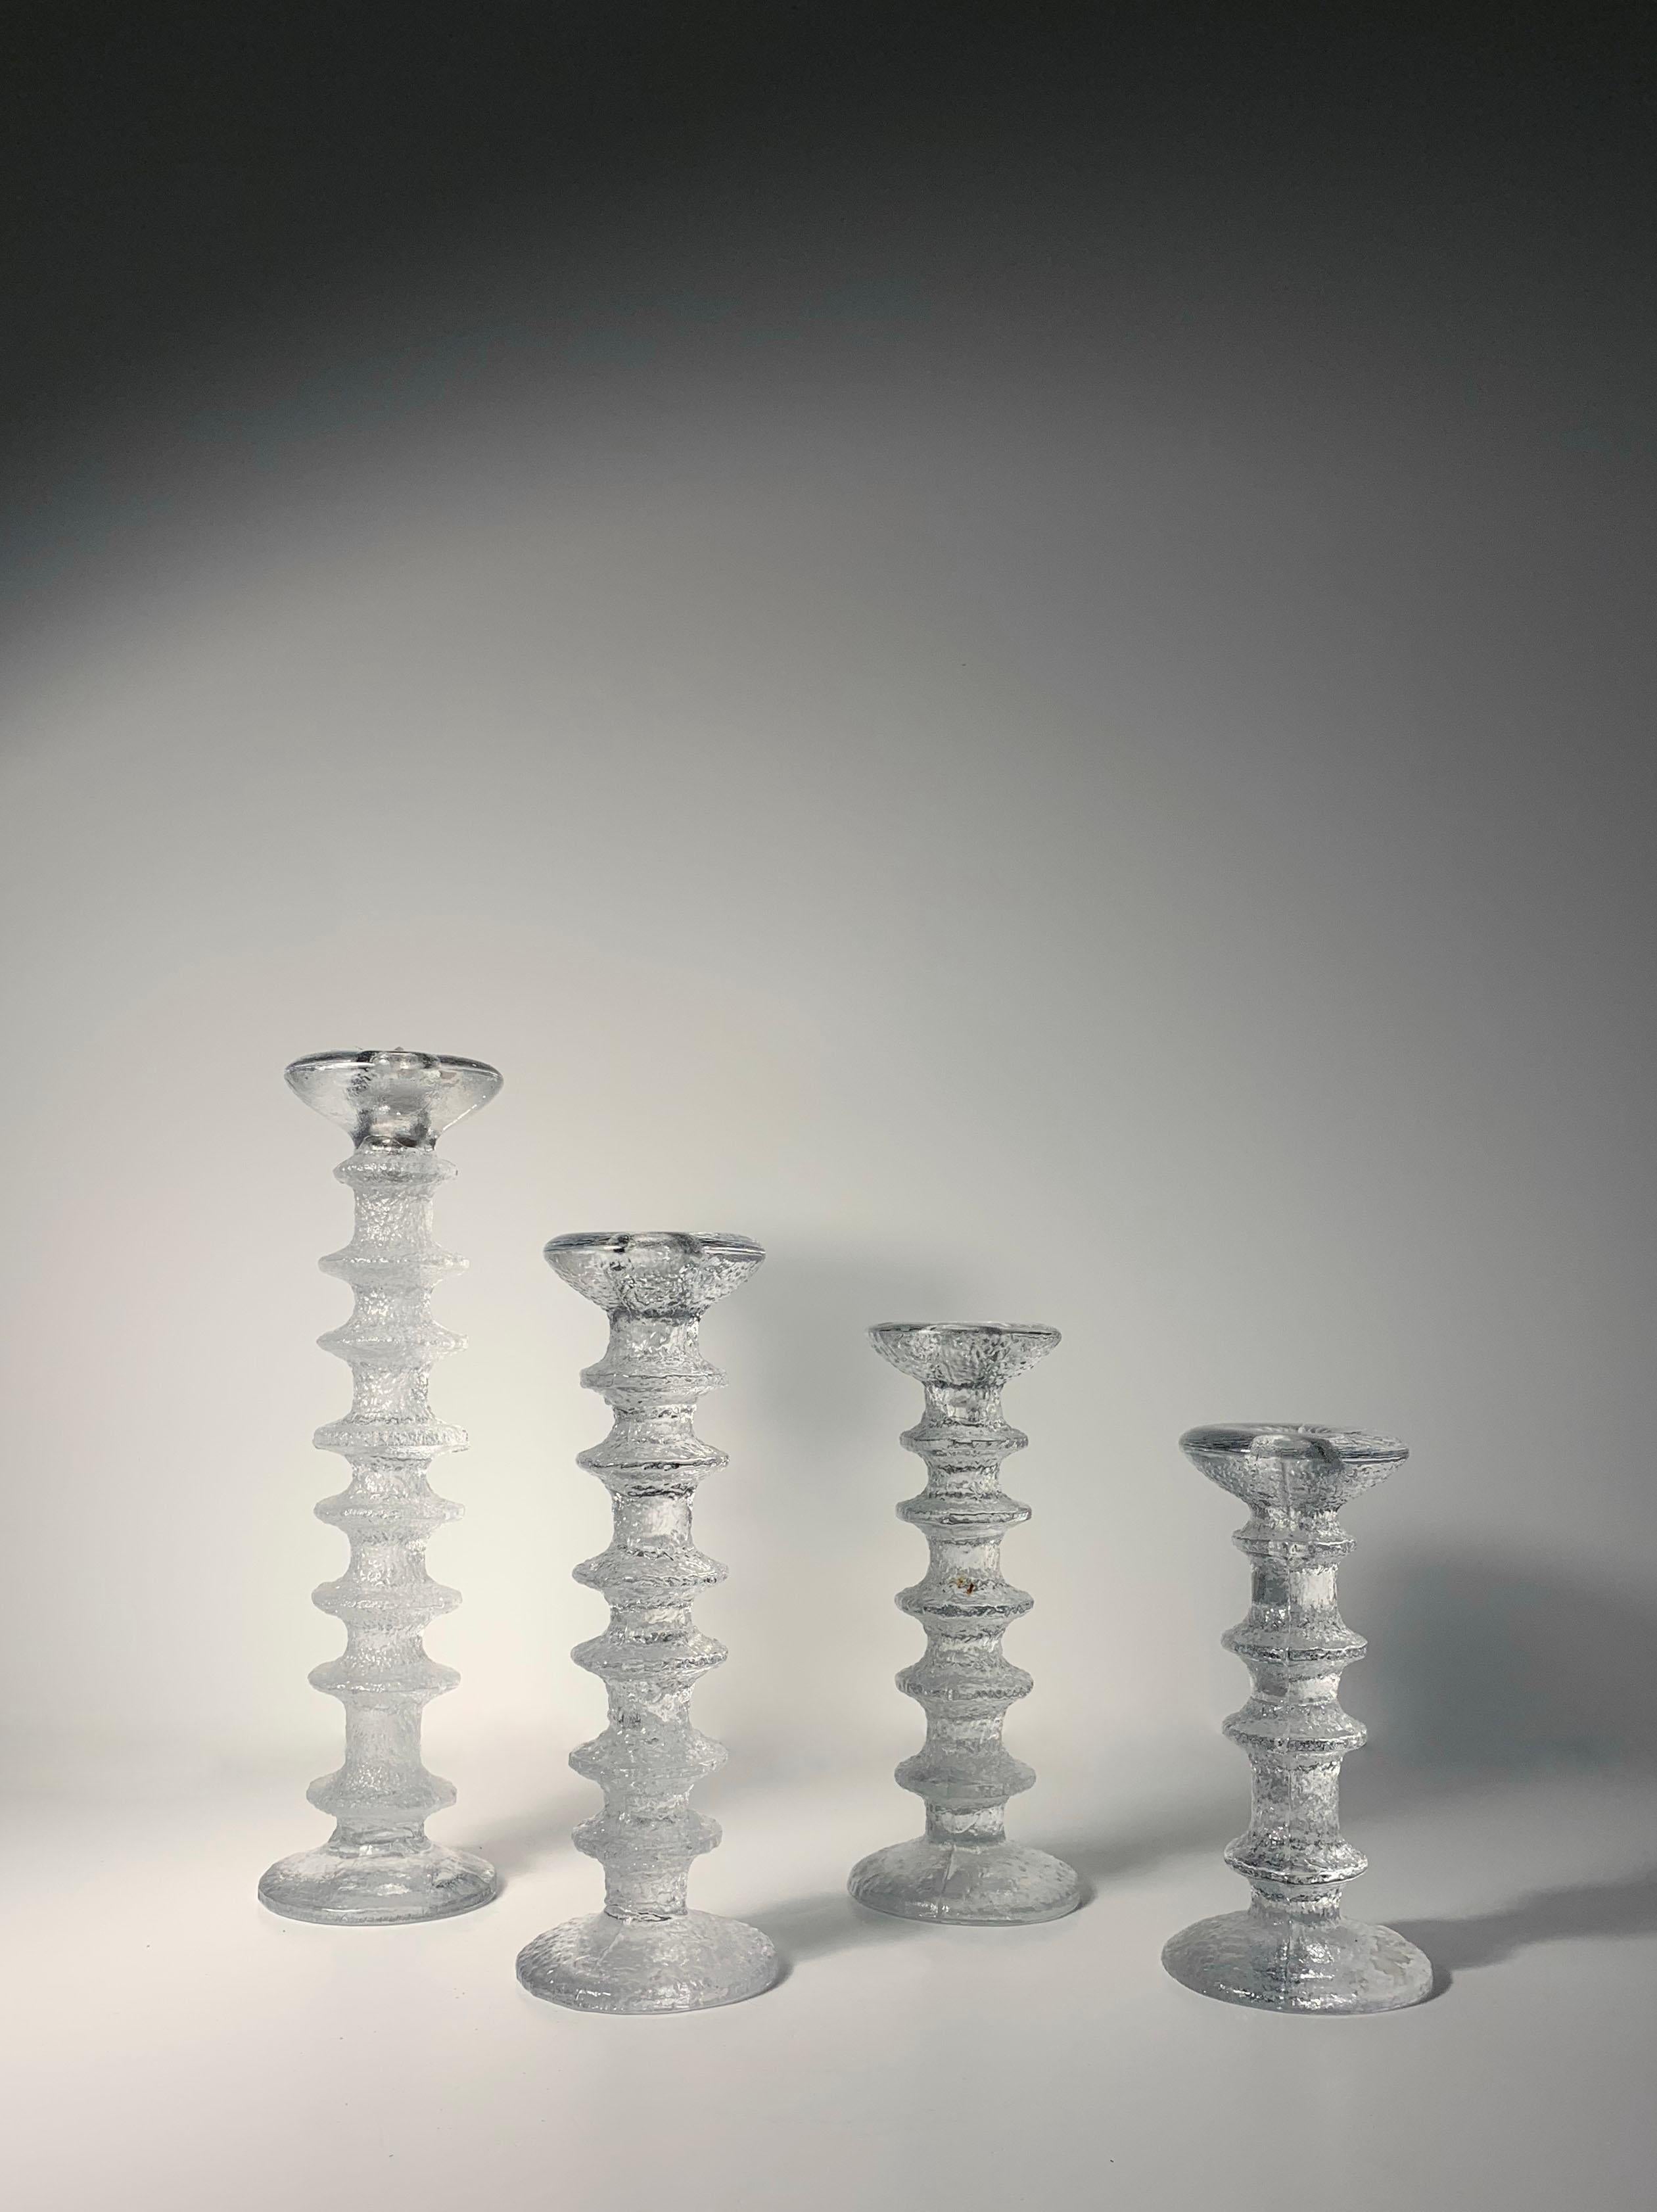 1960s Timo Sarpaneva candlesticks. A nice set of 4 in complimentary heights.